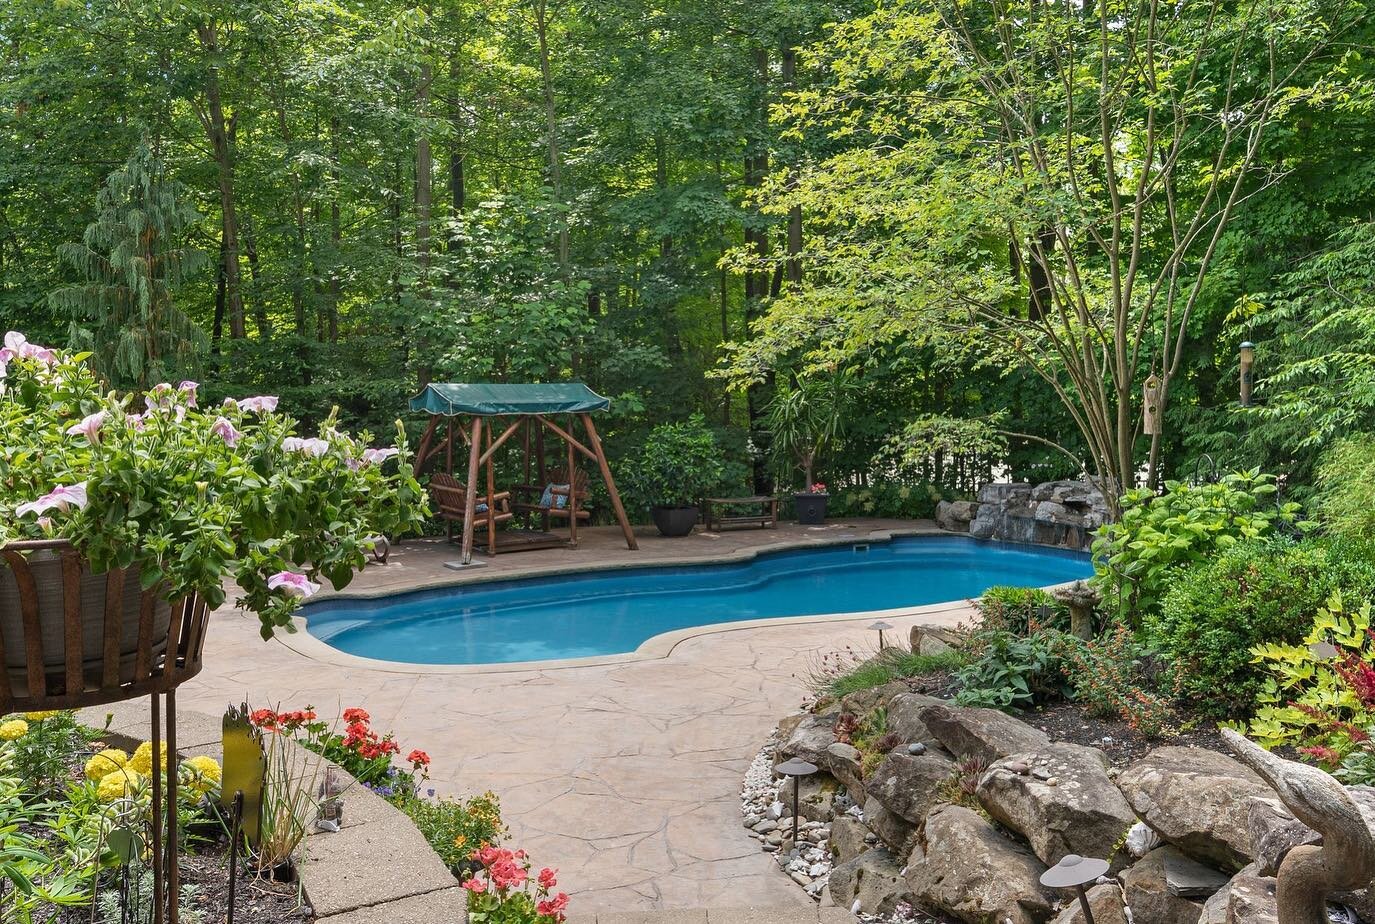 Who needs a vacation when you can have this backyard?! ☀️

📍17350 Owls Hollow, Chagrin Falls

#realestatephotography #clevelandrealtor #clevelandhomes #clevelandrealtors #clevelandhomesforsale #clevelandrealestatephotographer #clevelandrealestateage